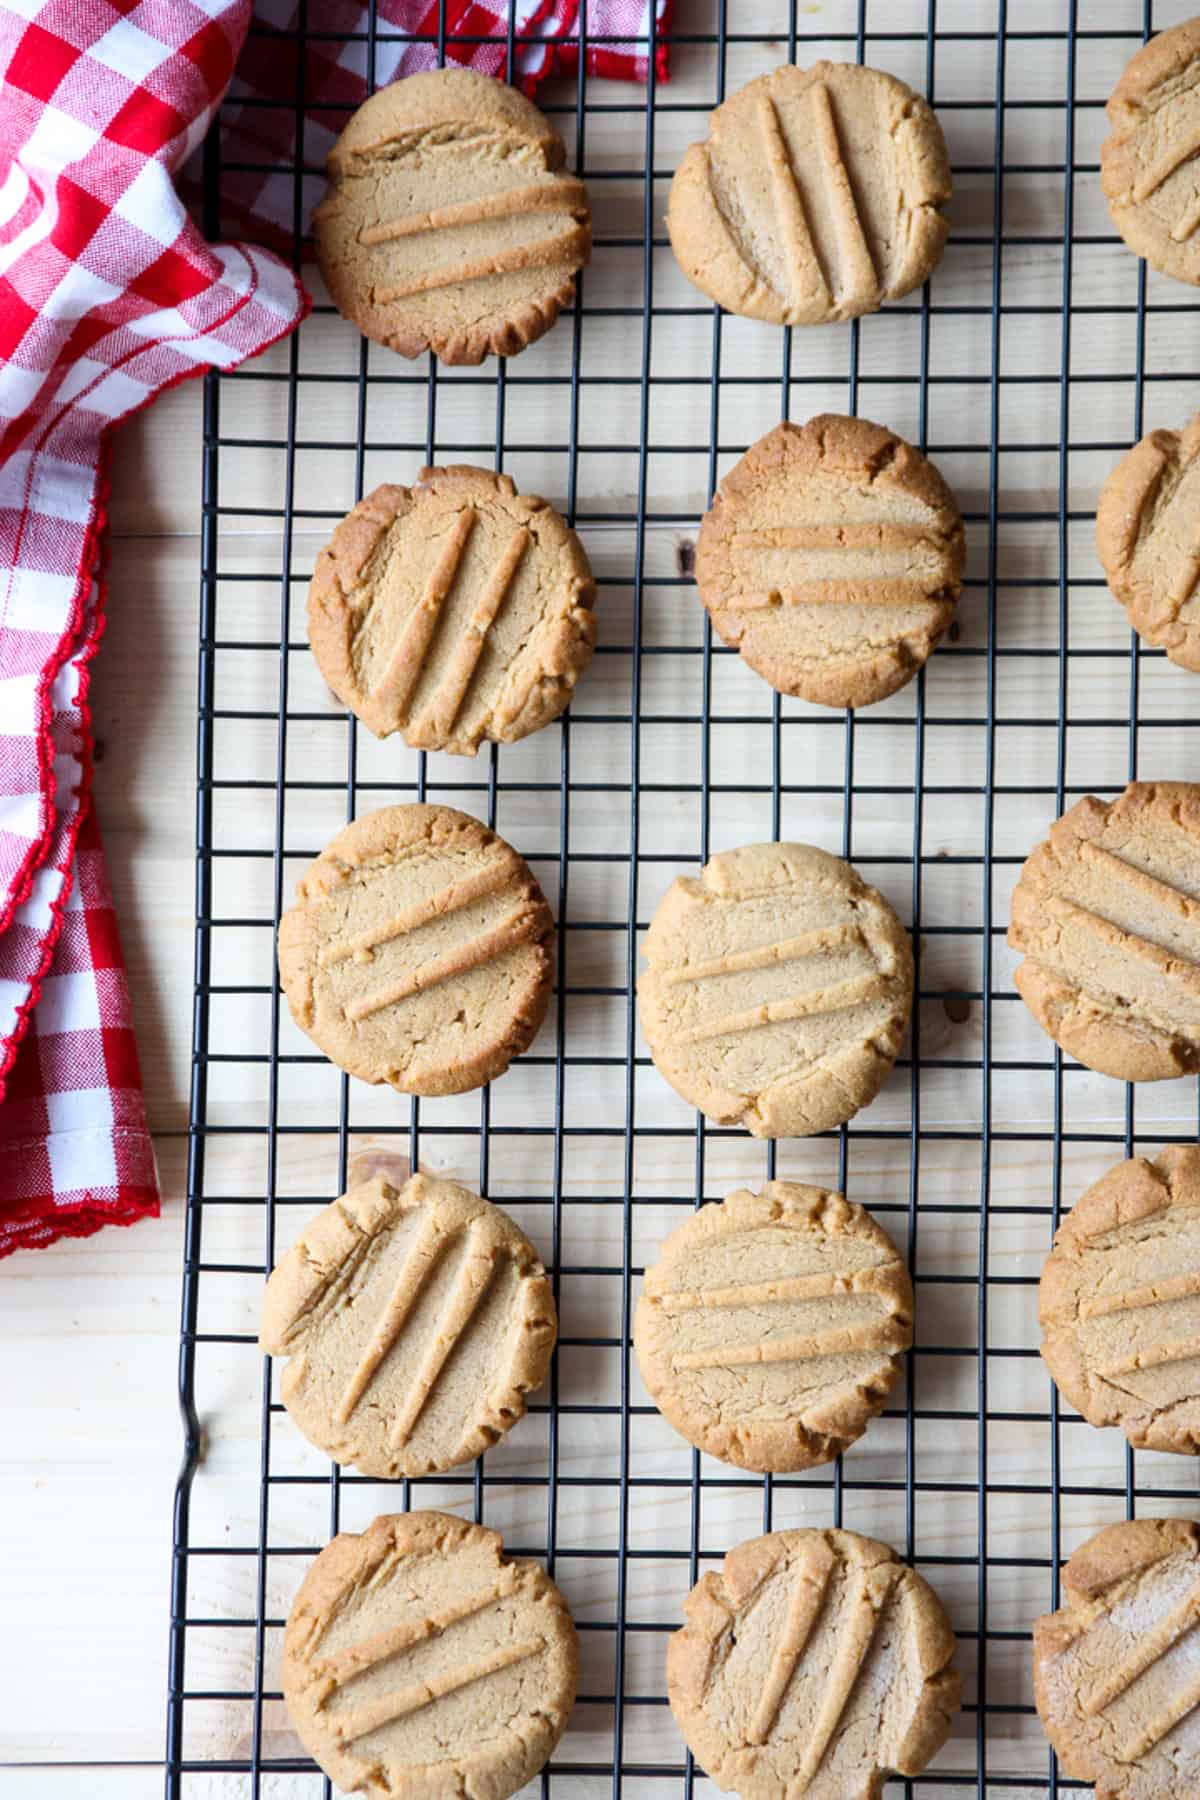 A dozen peanut butter cookies cooling on a wire rack.